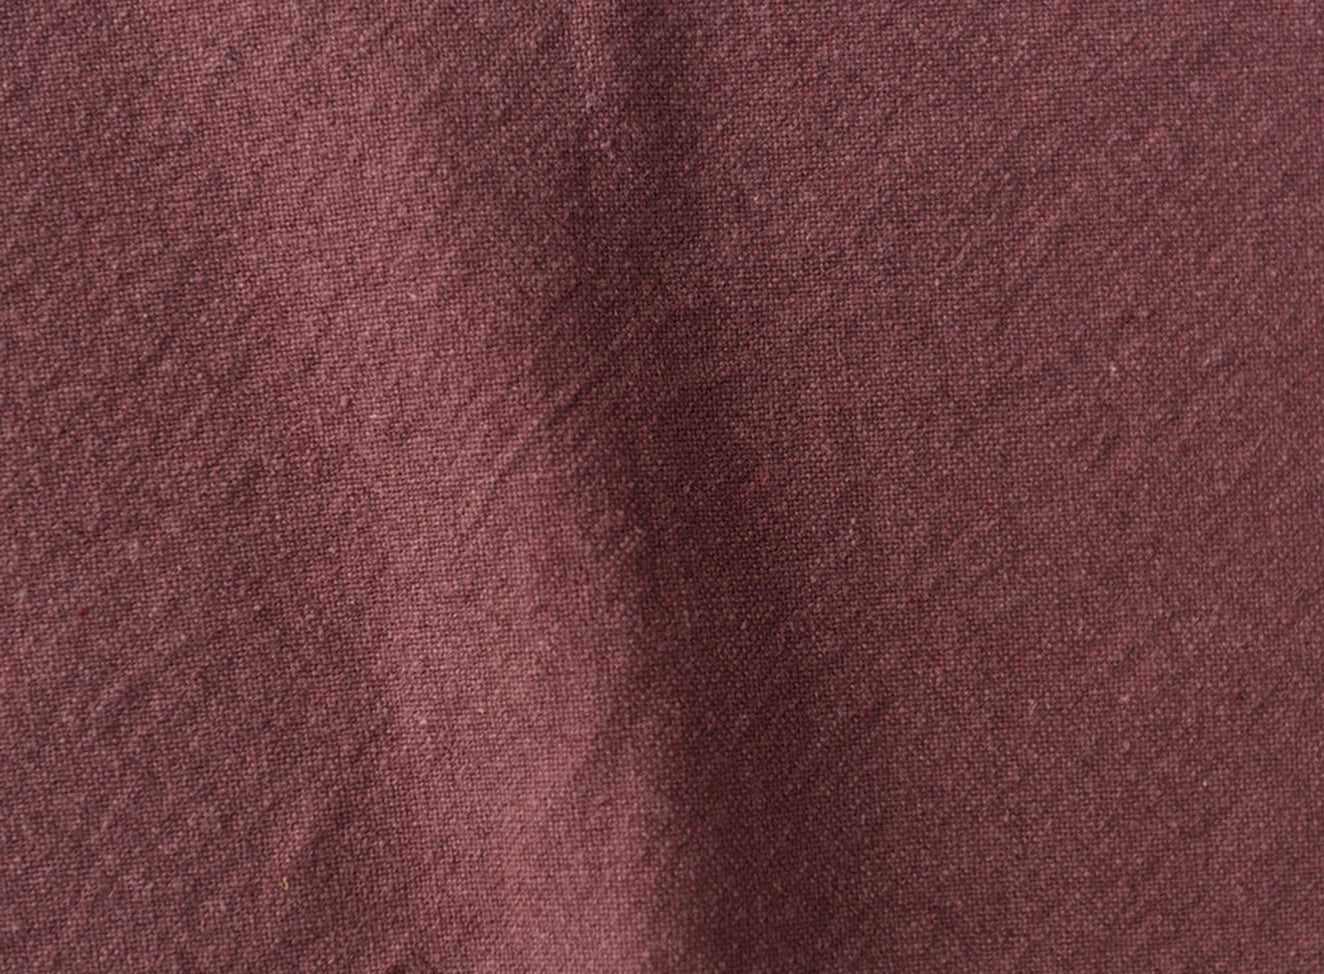 Swatch in Summer Plum, a soft maroon Thread-Dyed Cotton Linen